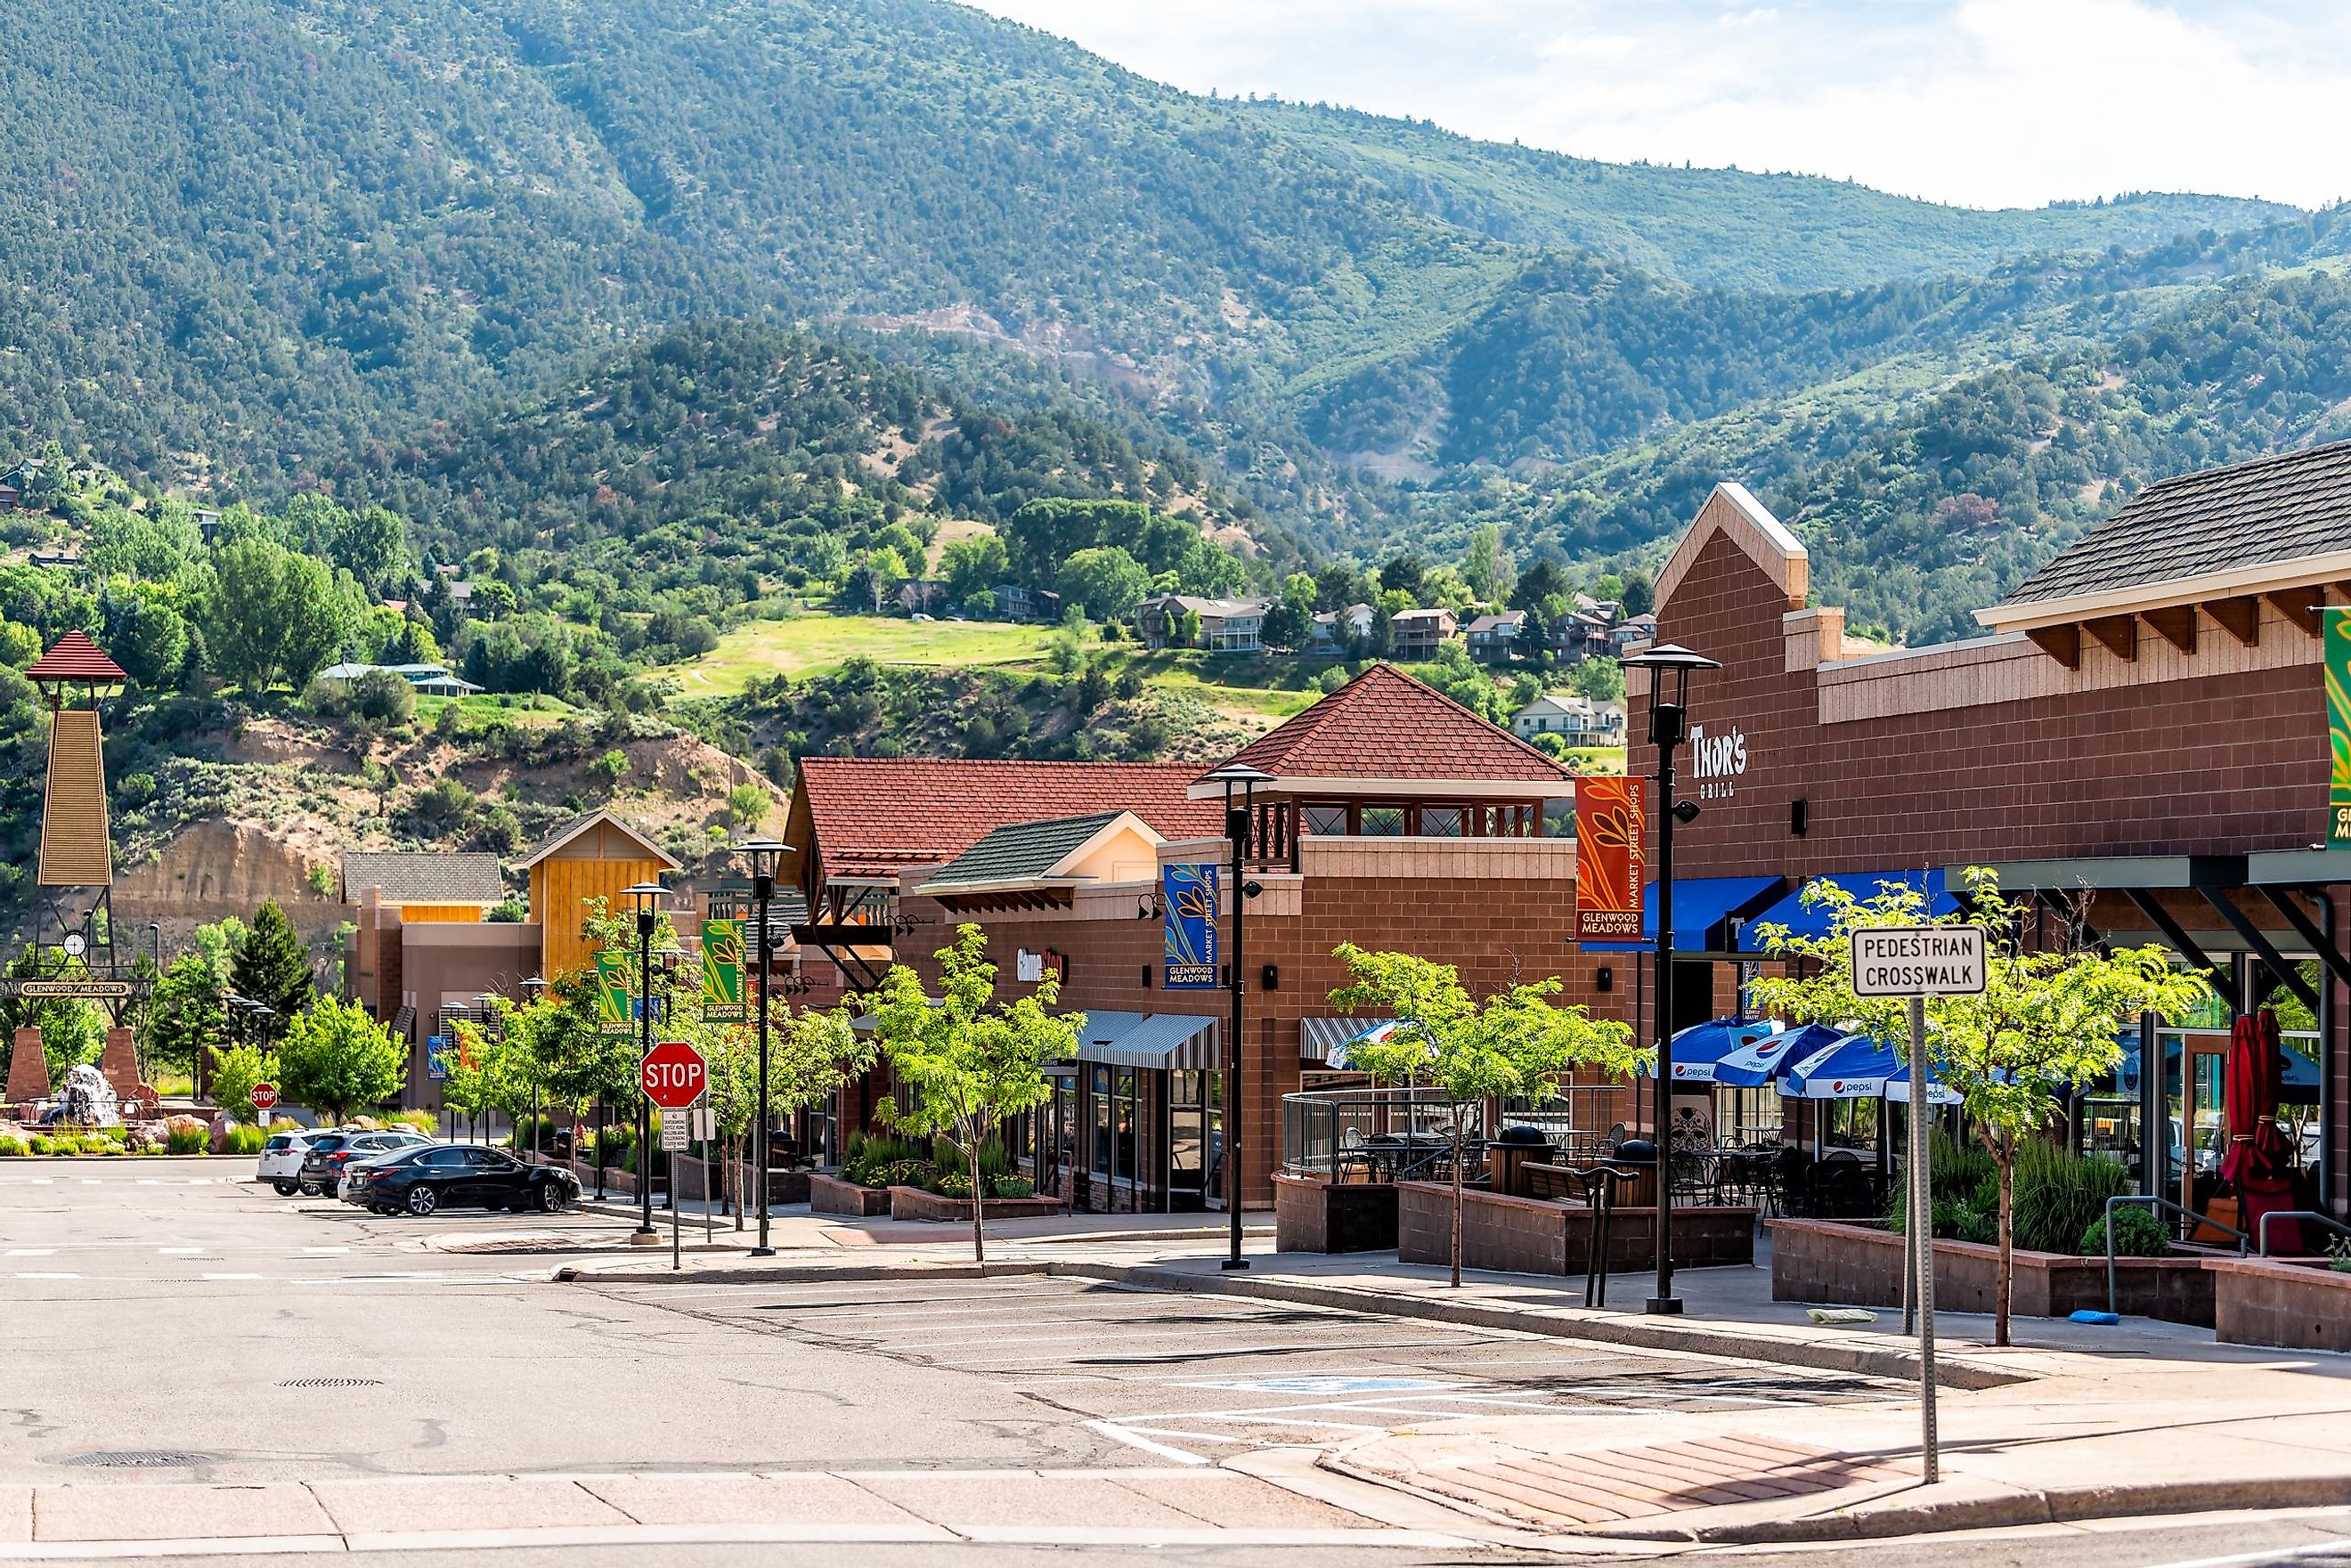 Glenwood Springs: Shopping meadows mall park stores in Colorado